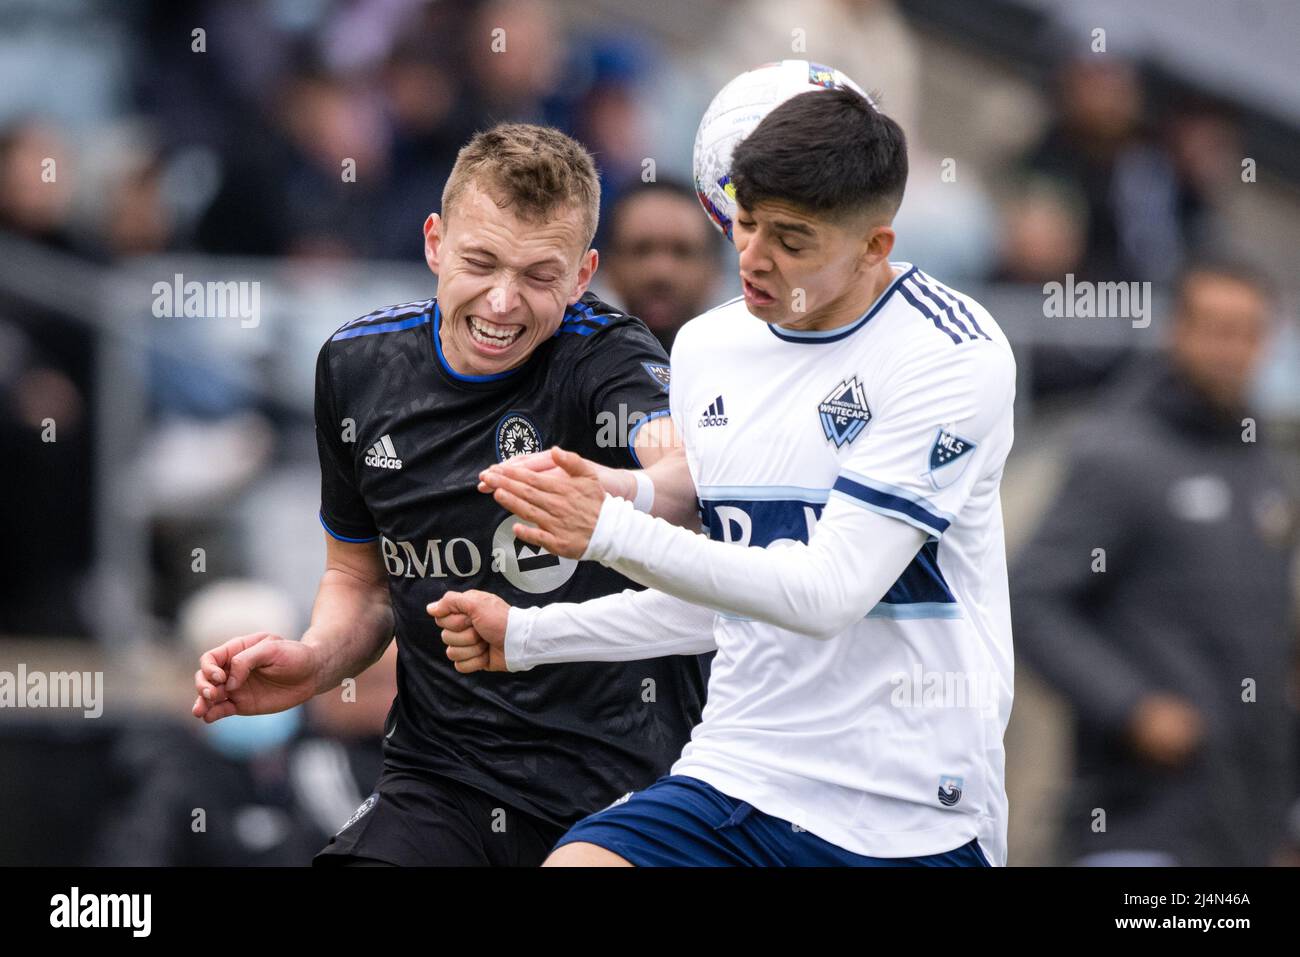 MONTREAL, QC - APRIL 16: Alistair Johnston (22) of CF MontrÃ©al battles with CristiÃ¡n GutiÃ©rrez (3) of Vancouver Whitecaps for possession of the ball during the second half of the MLS game between the Vancouver Whitecaps and the CF Montreal game on April 16, 2022, at Stade Saputo in Montreal, QC  (Credit Image: © Vincent Ethier/Icon SMI via ZUMA Press) Stock Photo